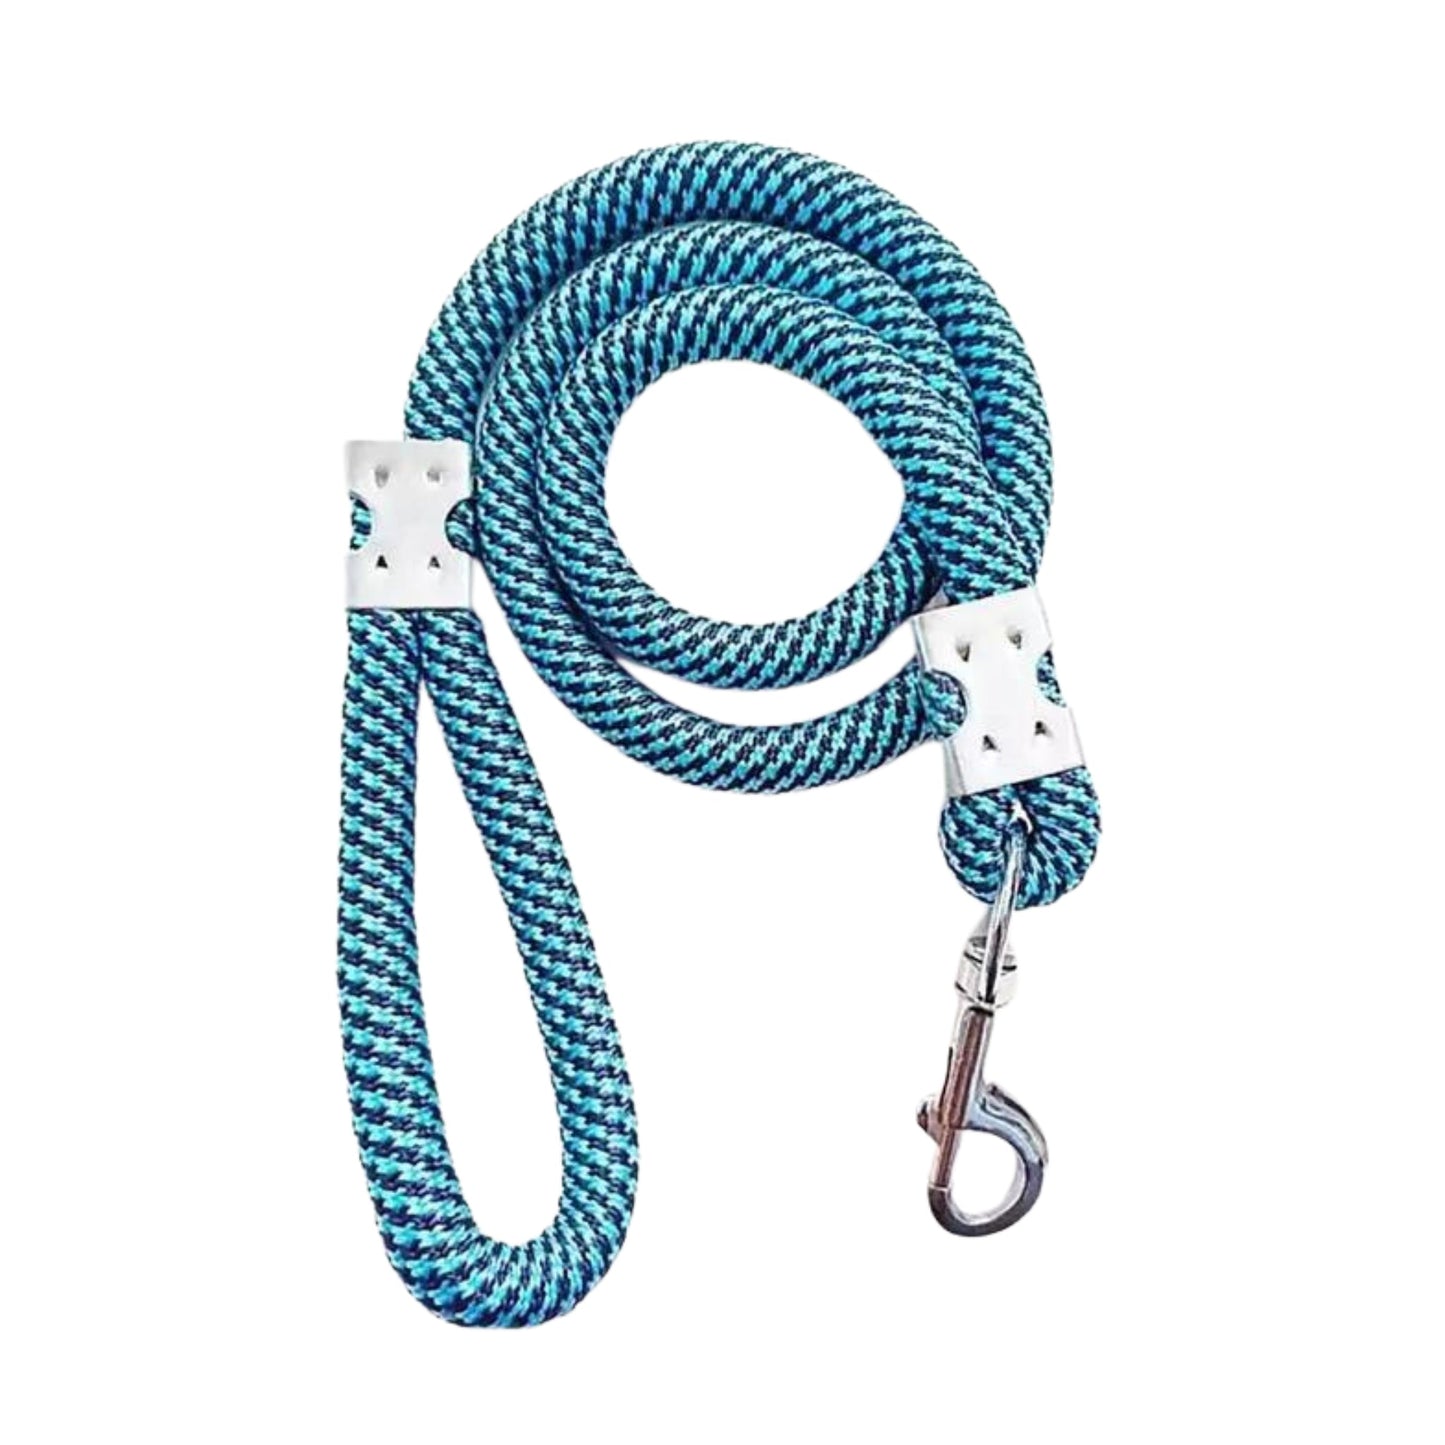 Foodie Puppies Nylon Leash for Medium & Large Dogs - 15mm (Color May Vary)